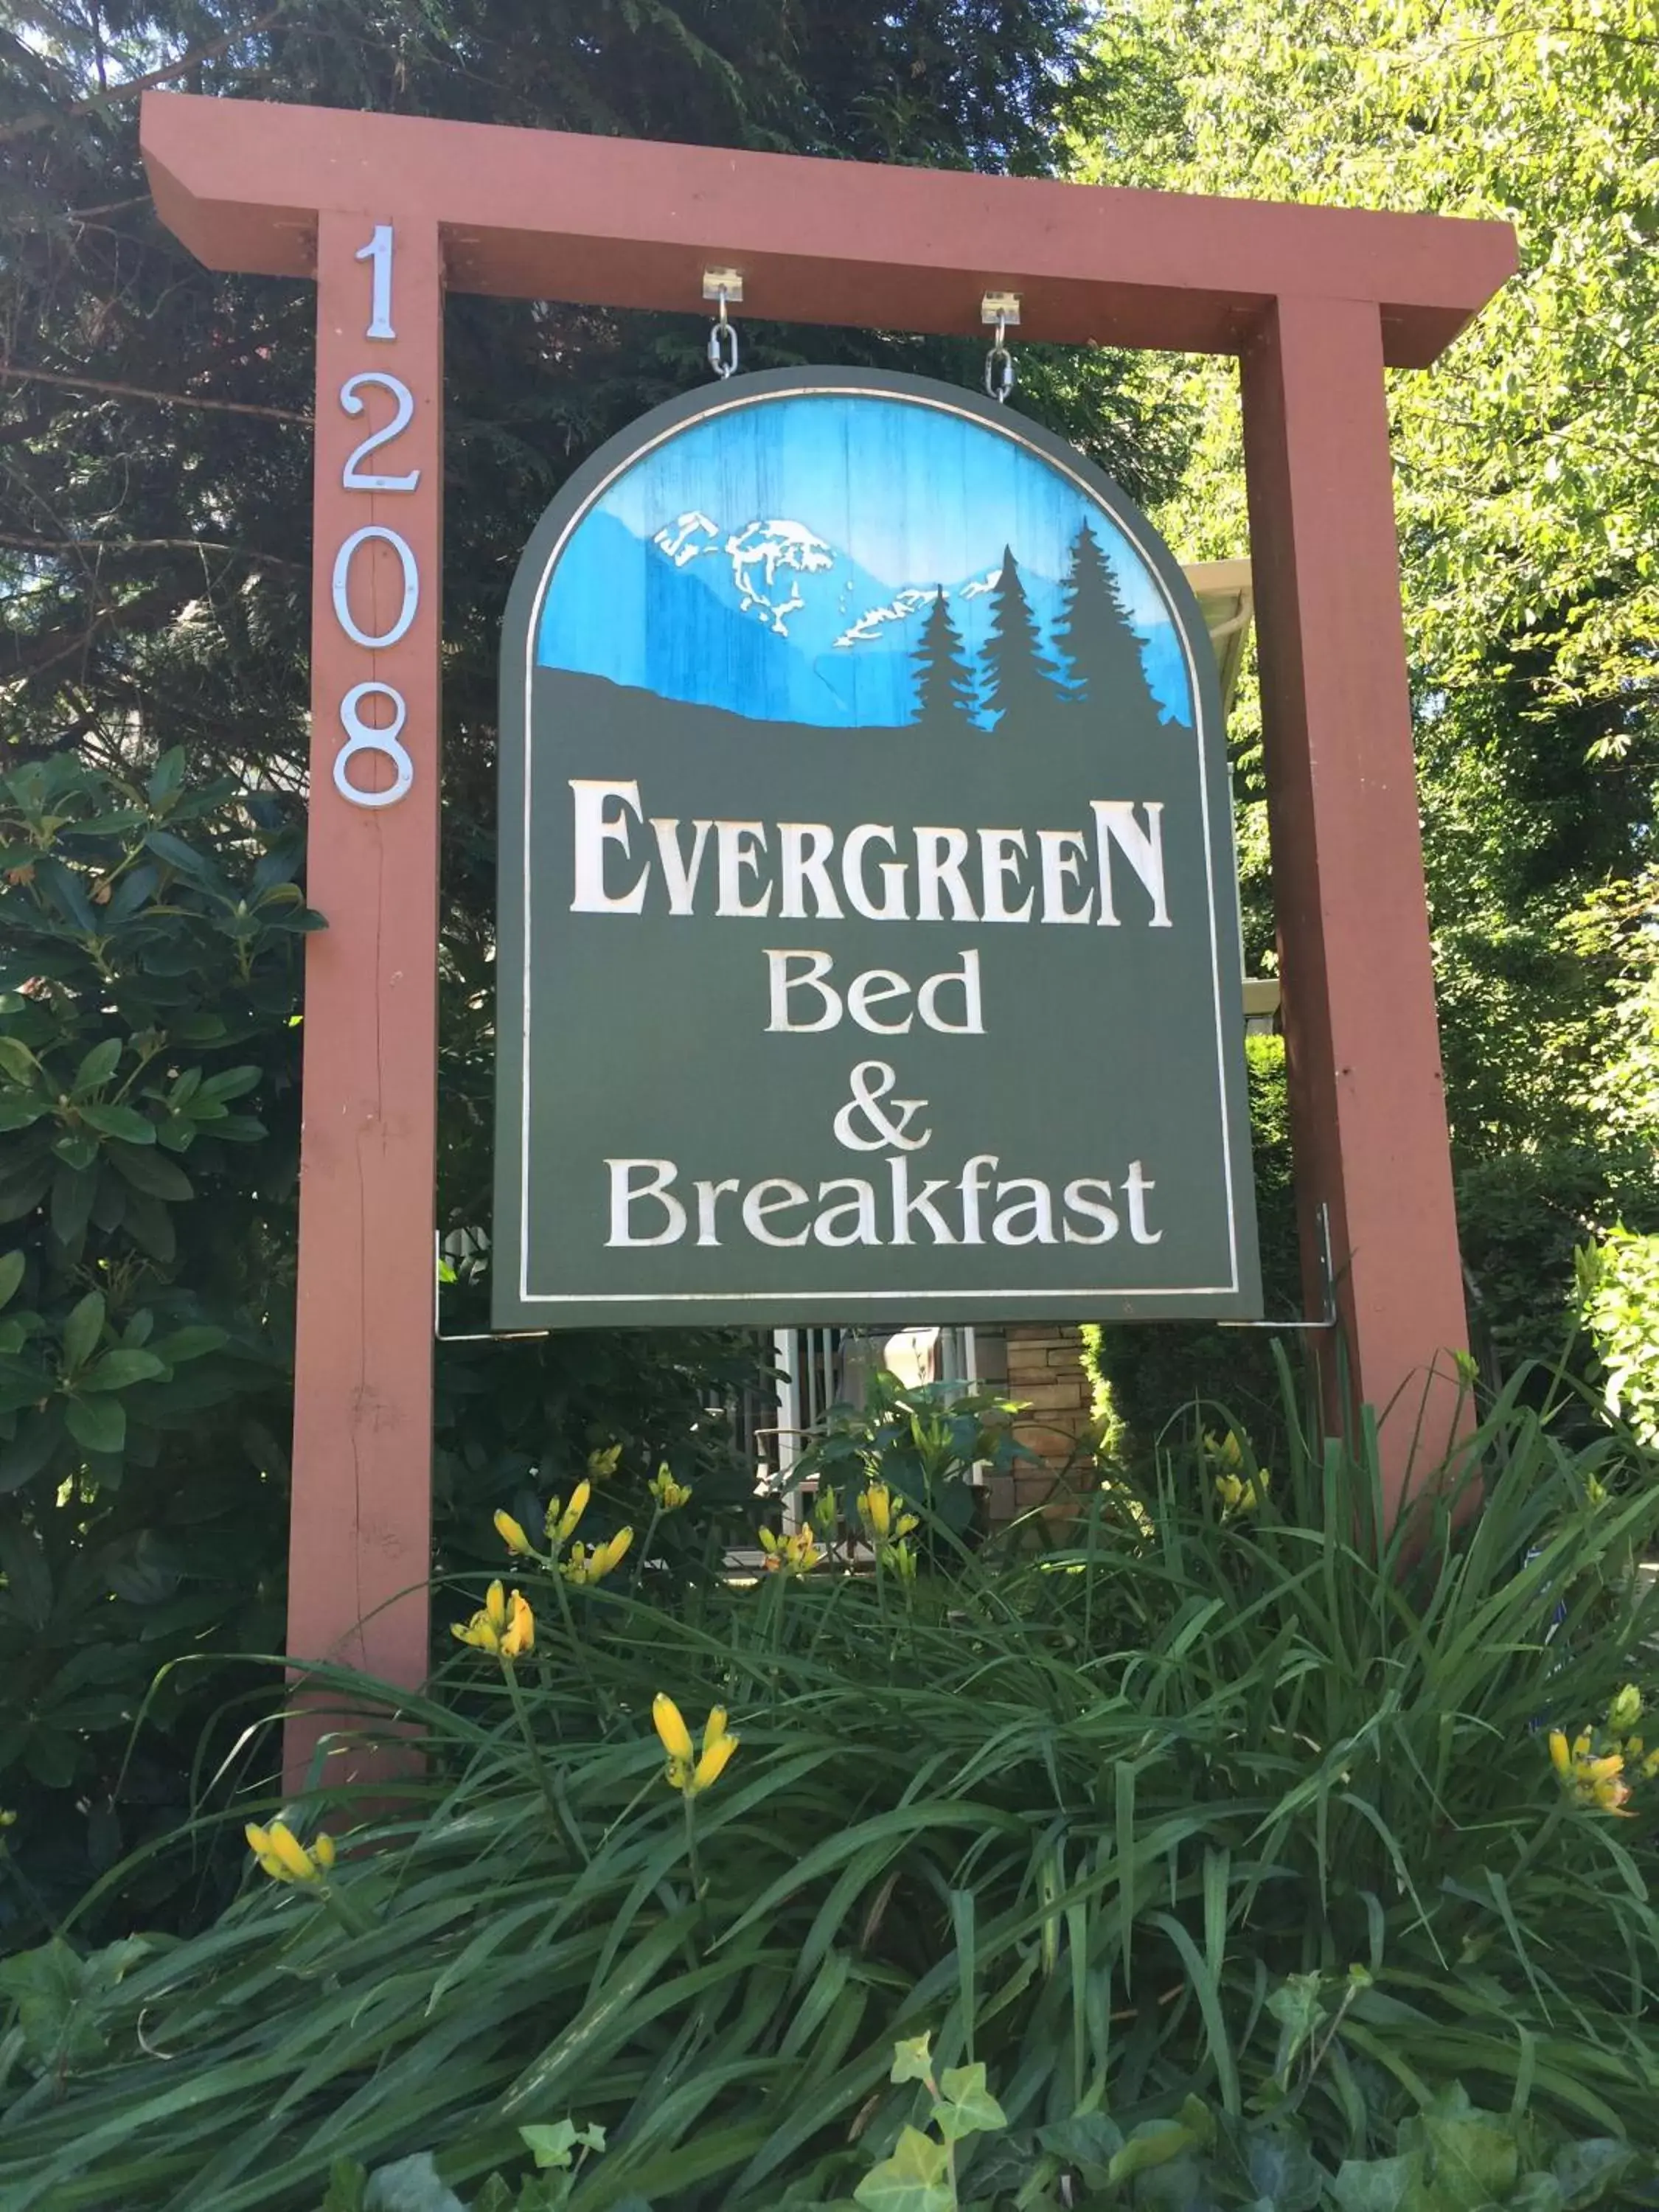 Property logo or sign, Property Logo/Sign in Evergreen Bed & Breakfast